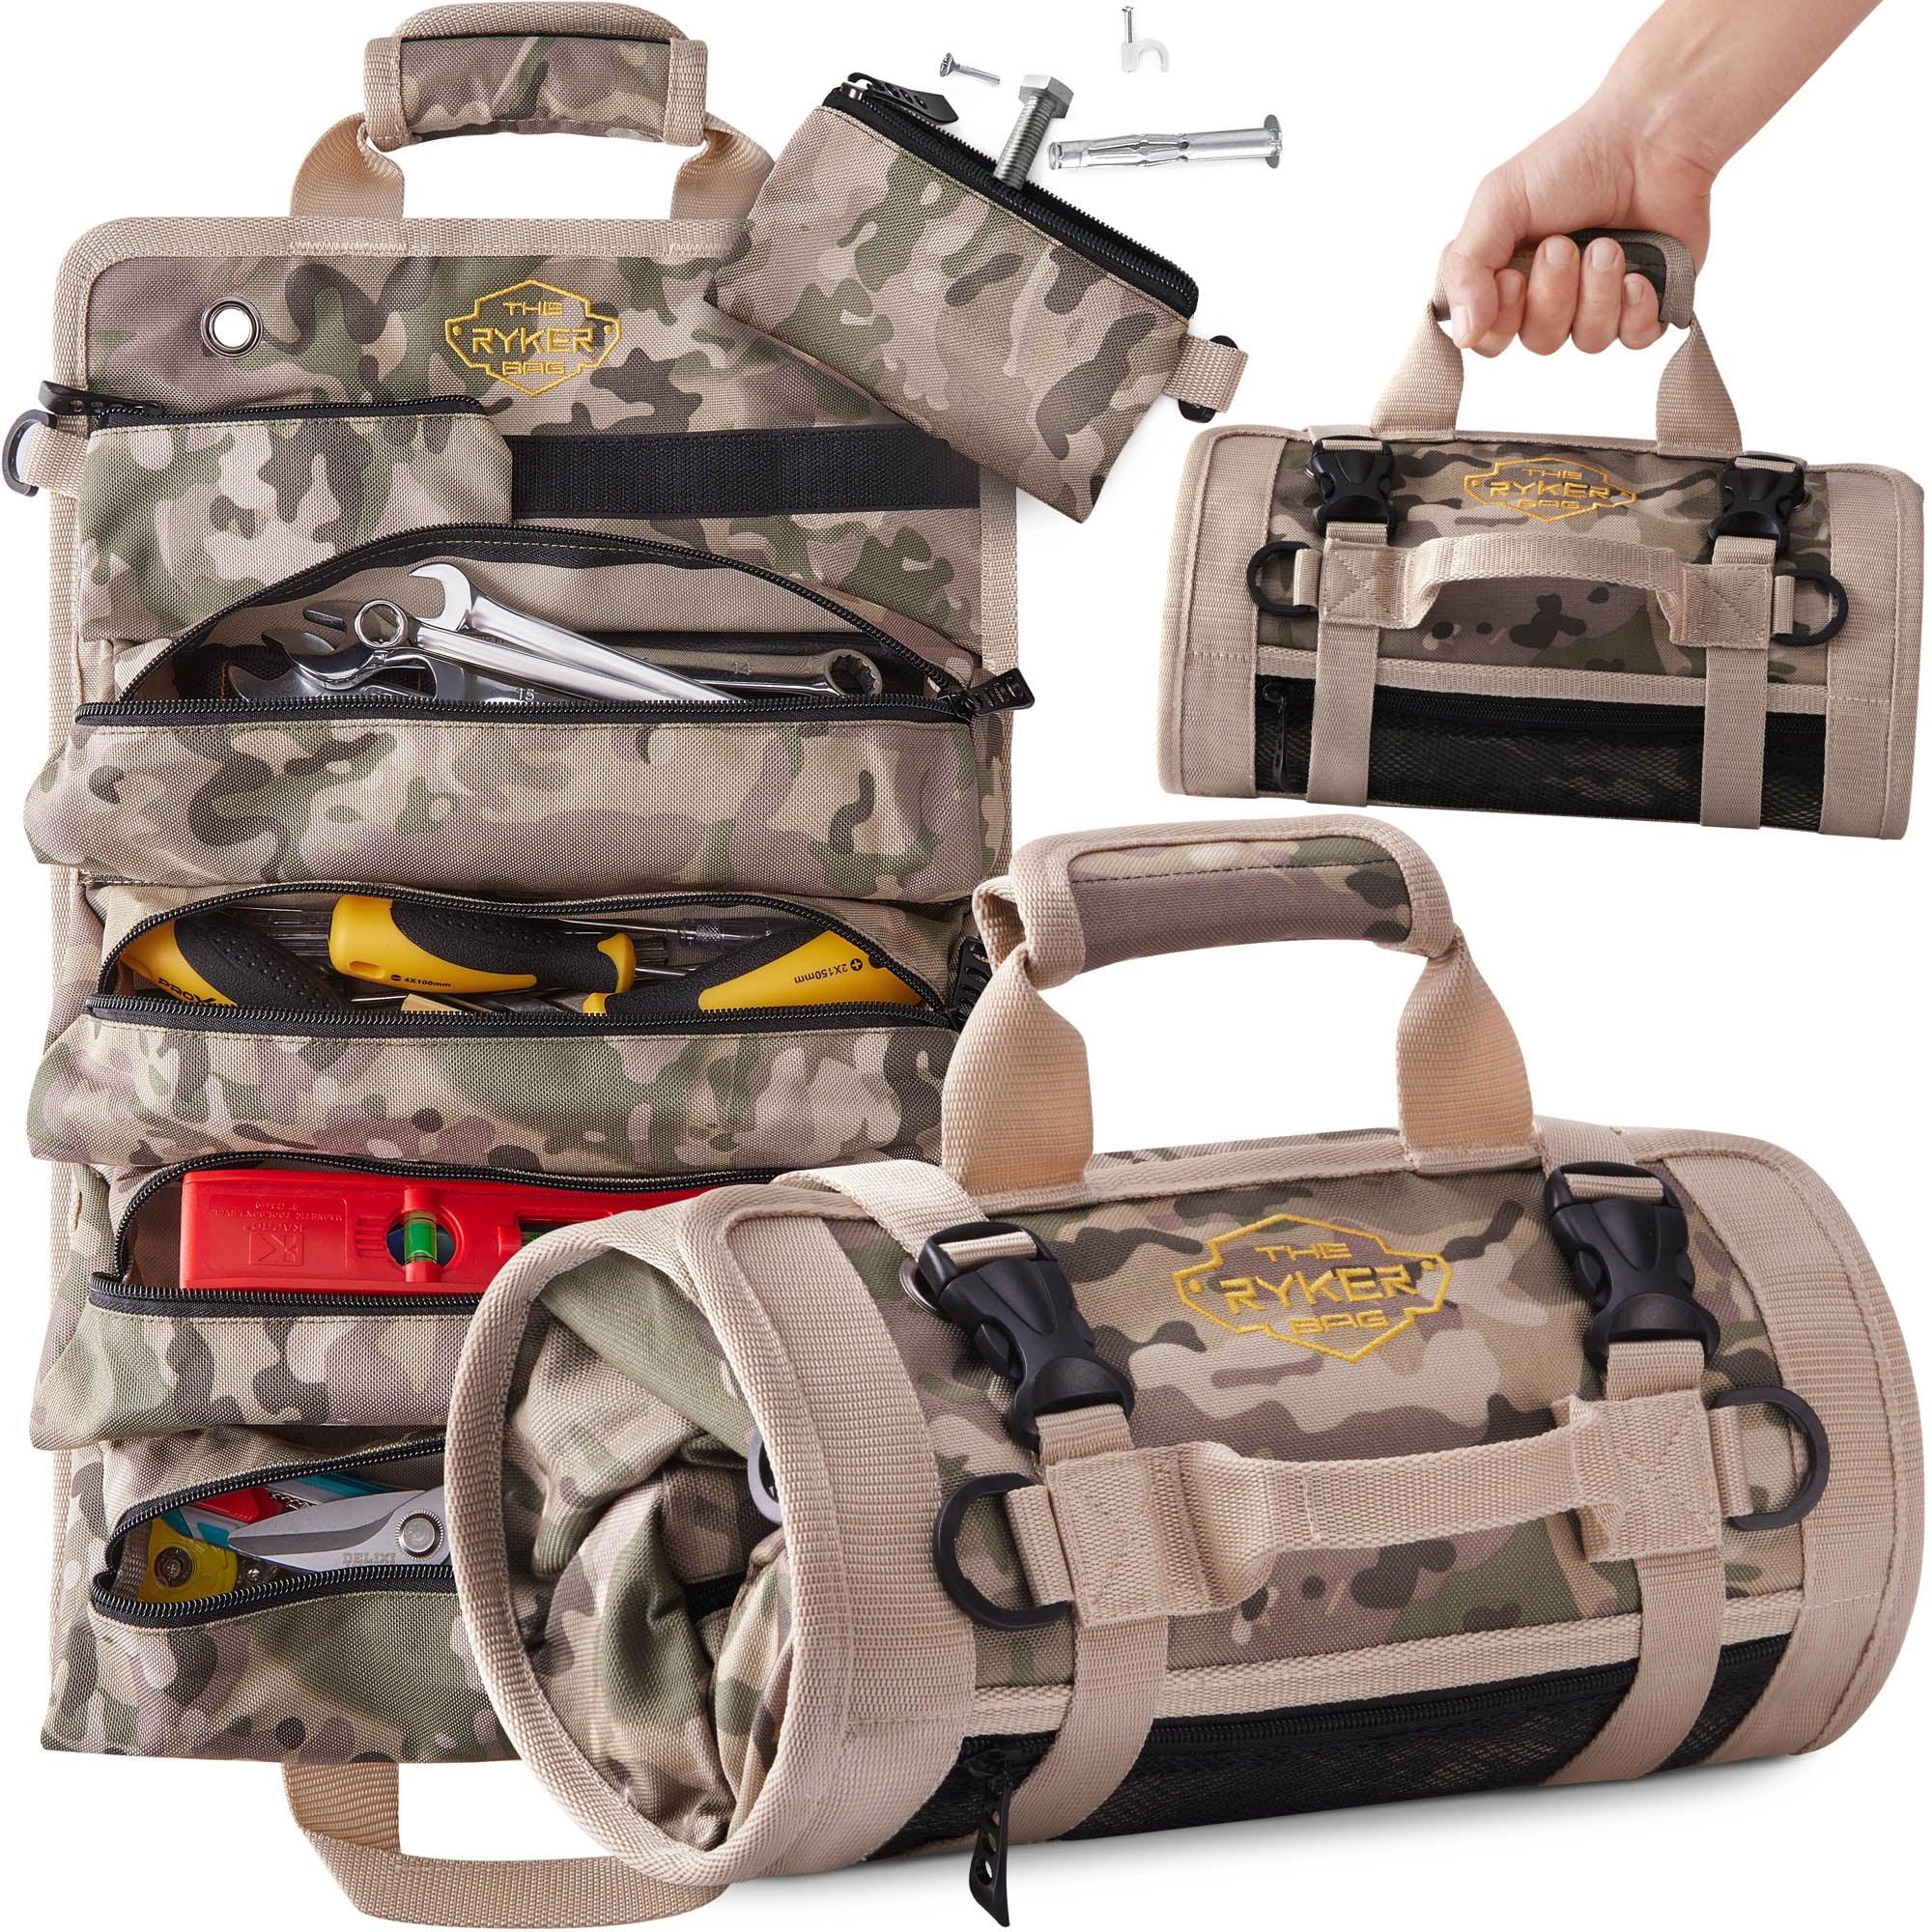 The Ryker Bag - Camouflage Tool Roll Bag